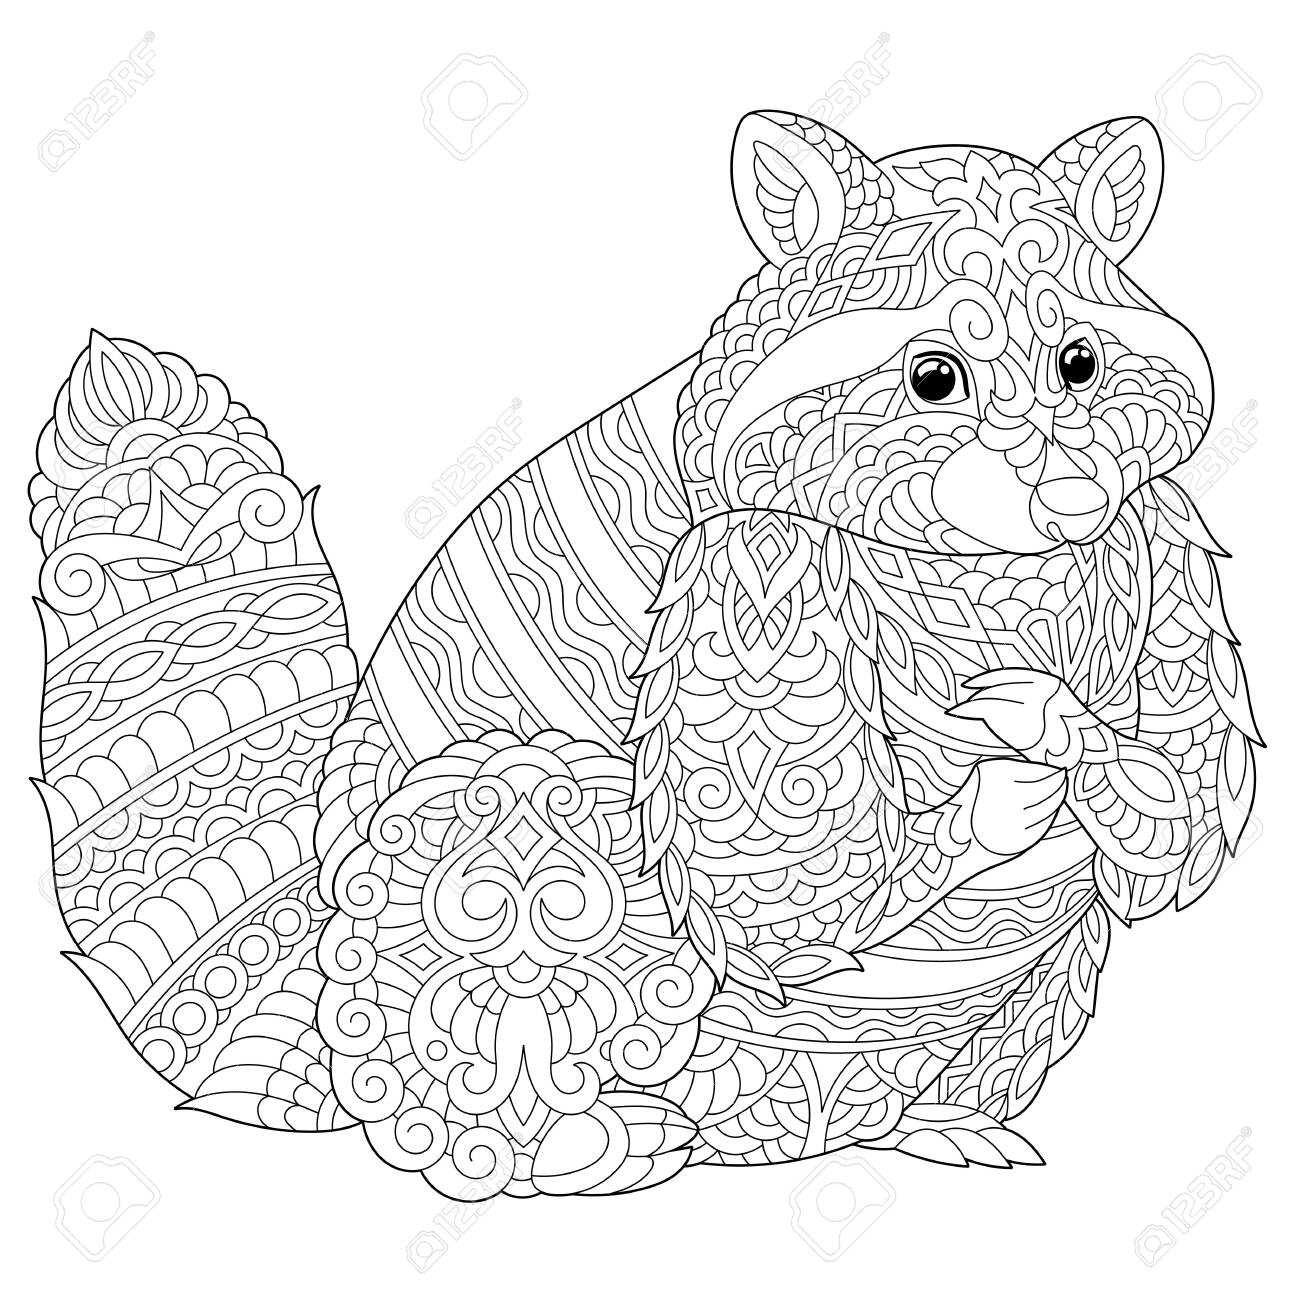 Coloring page anti stress colouring picture with raccoon freehand sketch drawing with doodle royalty free svg cliparts vectors and stock illustration image